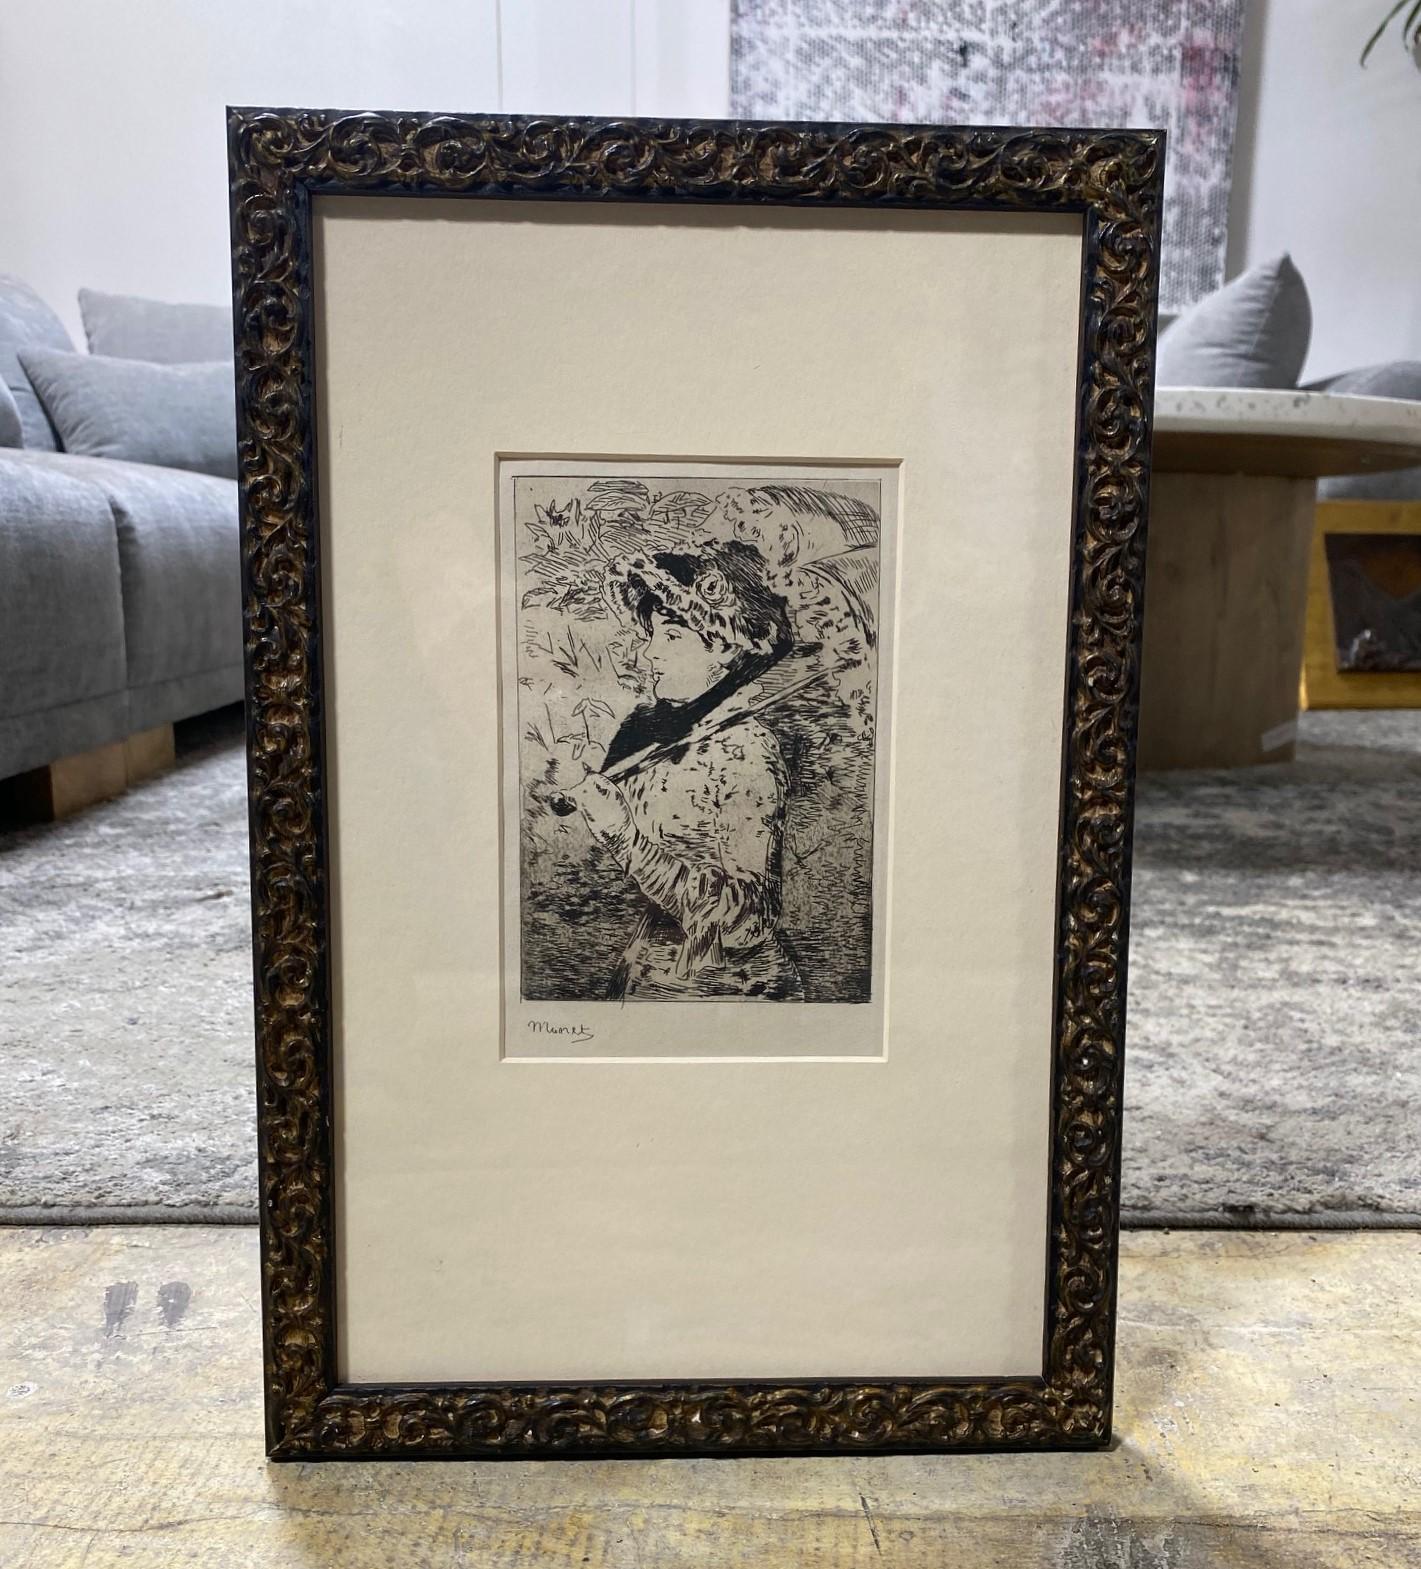 A beautiful aquatint etching by French Modernist/Impressionist artist Édouard Manet titled 